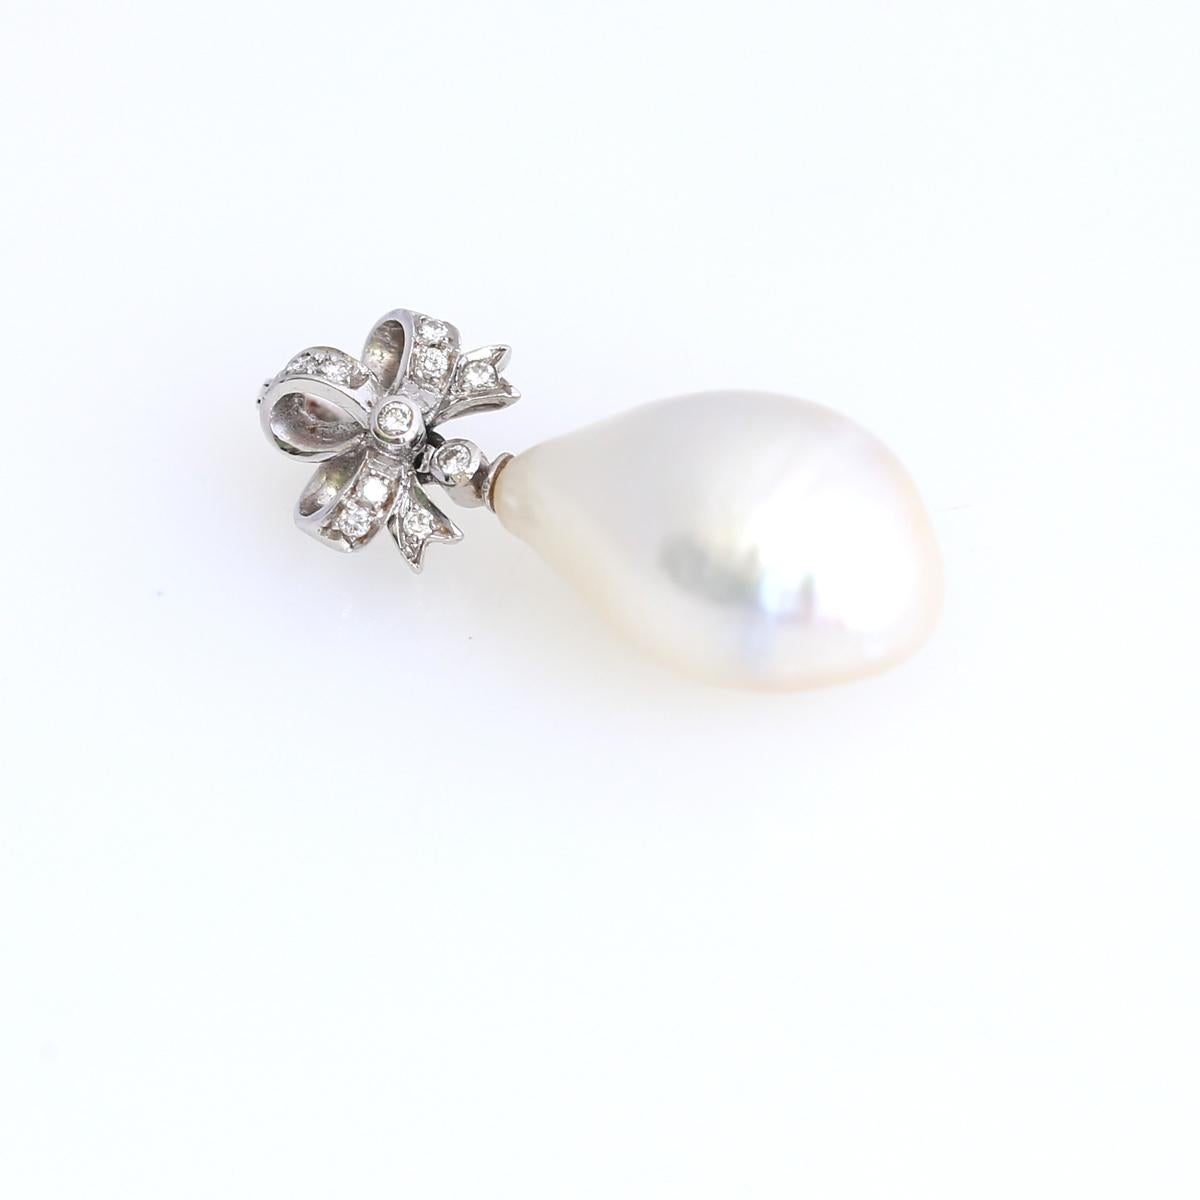 The white/silver pearl hang from charming platinum and gold diamond box ribbon motif pendant. 1910. Lock stamped 18K.
Very comfortable lock, which can be mounted on a Pearl necklace or on its own. Pearl is probably the most ancient jewelry item. It